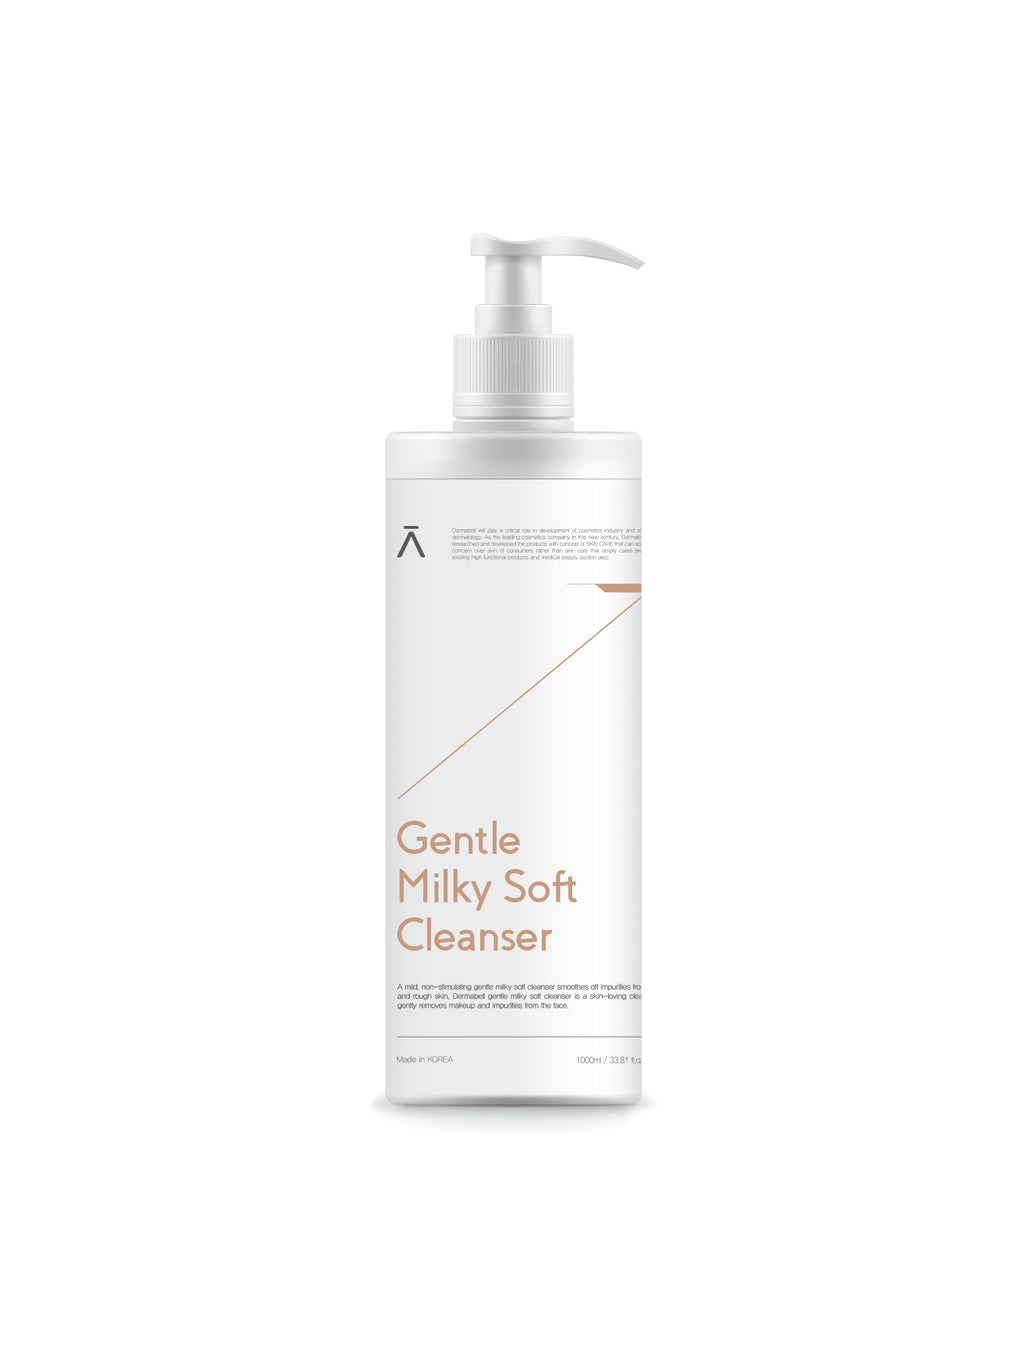 Gentle Milky Soft Cleanser (Gentle Cleansing Emulsion) Cleansing Milk by DERMABELL PRO